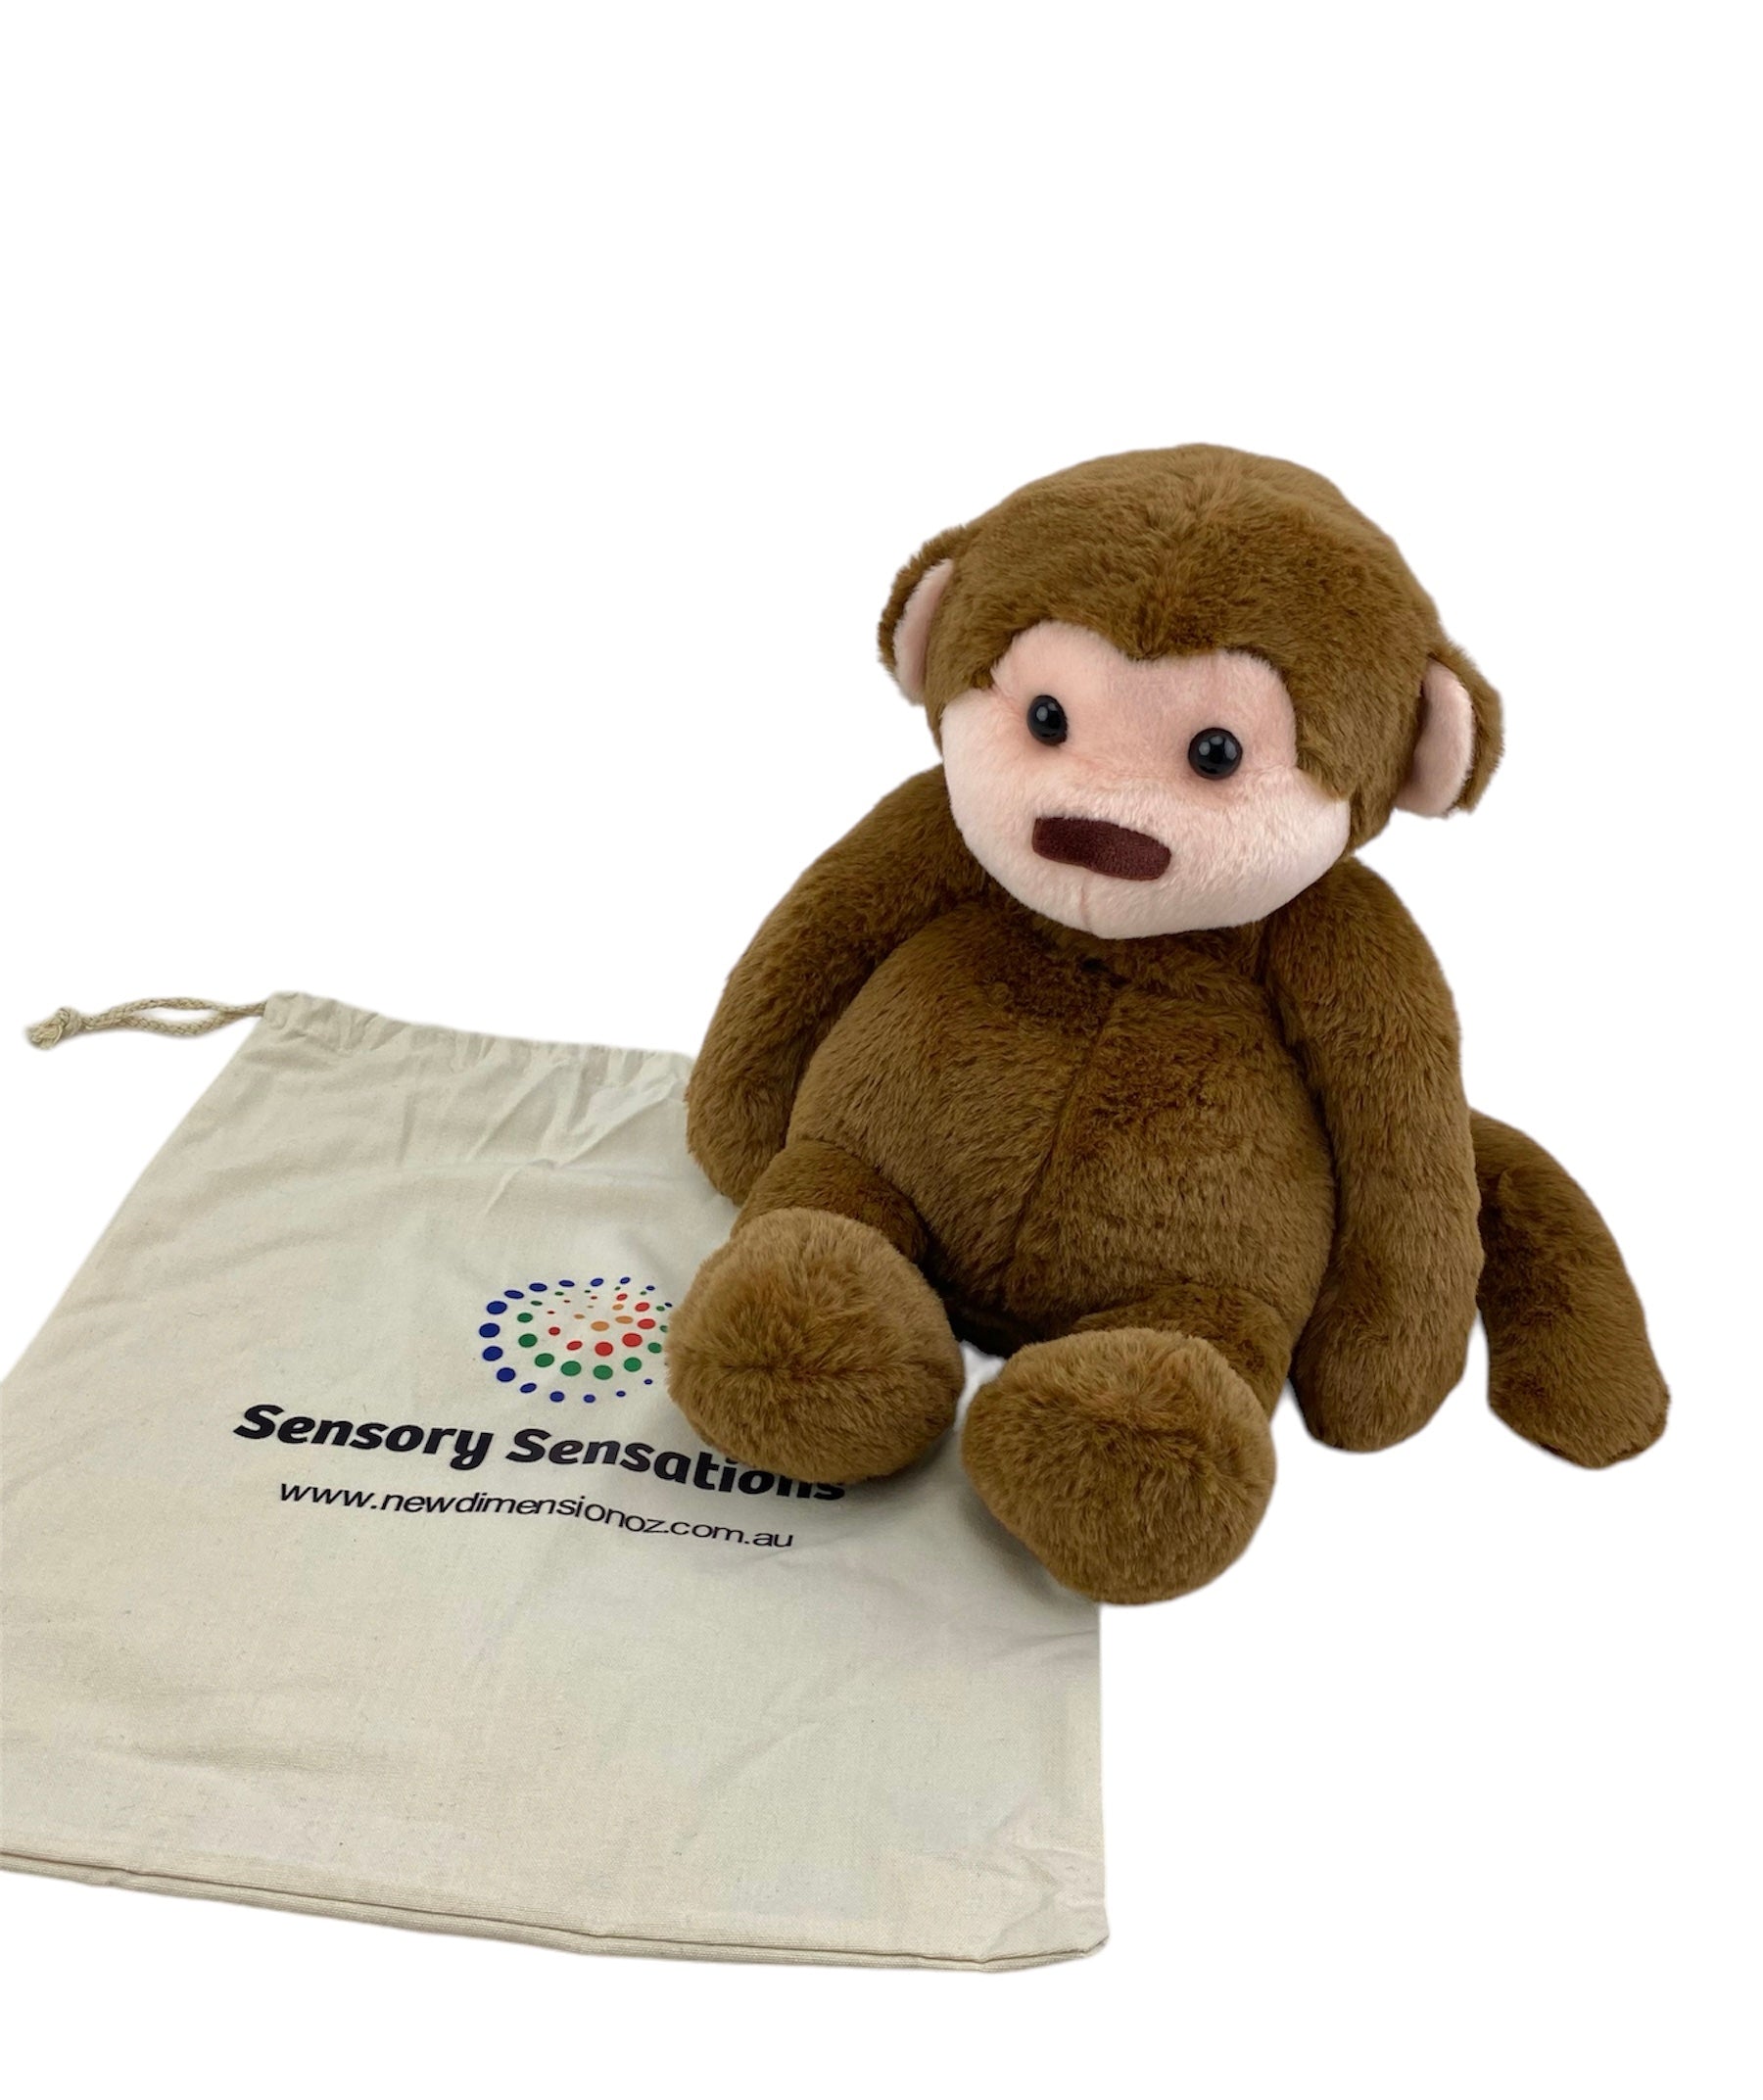 The 2kg Weighted Monkey pictured sitting on it's bag